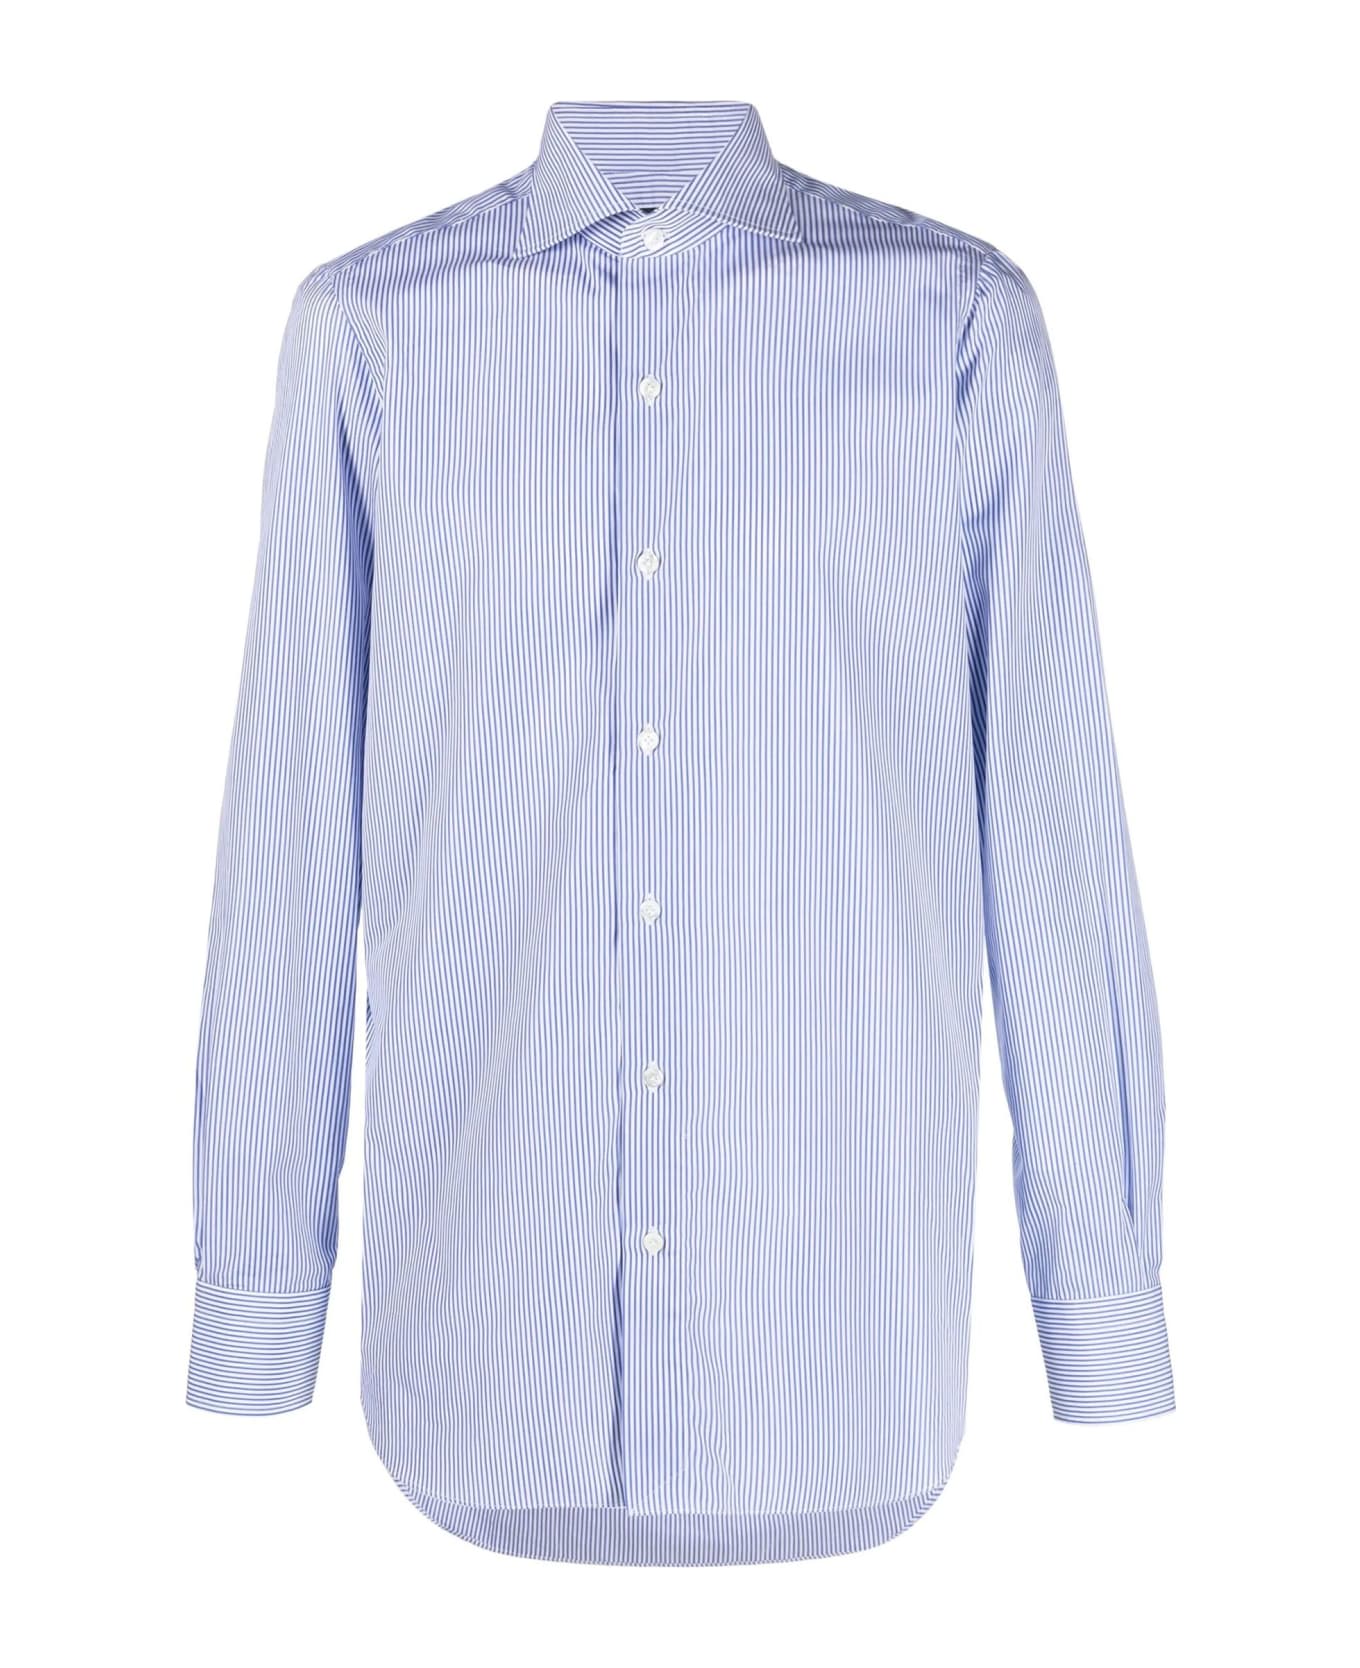 Finamore Royal Blue And White Cotton Shirt - Blue シャツ